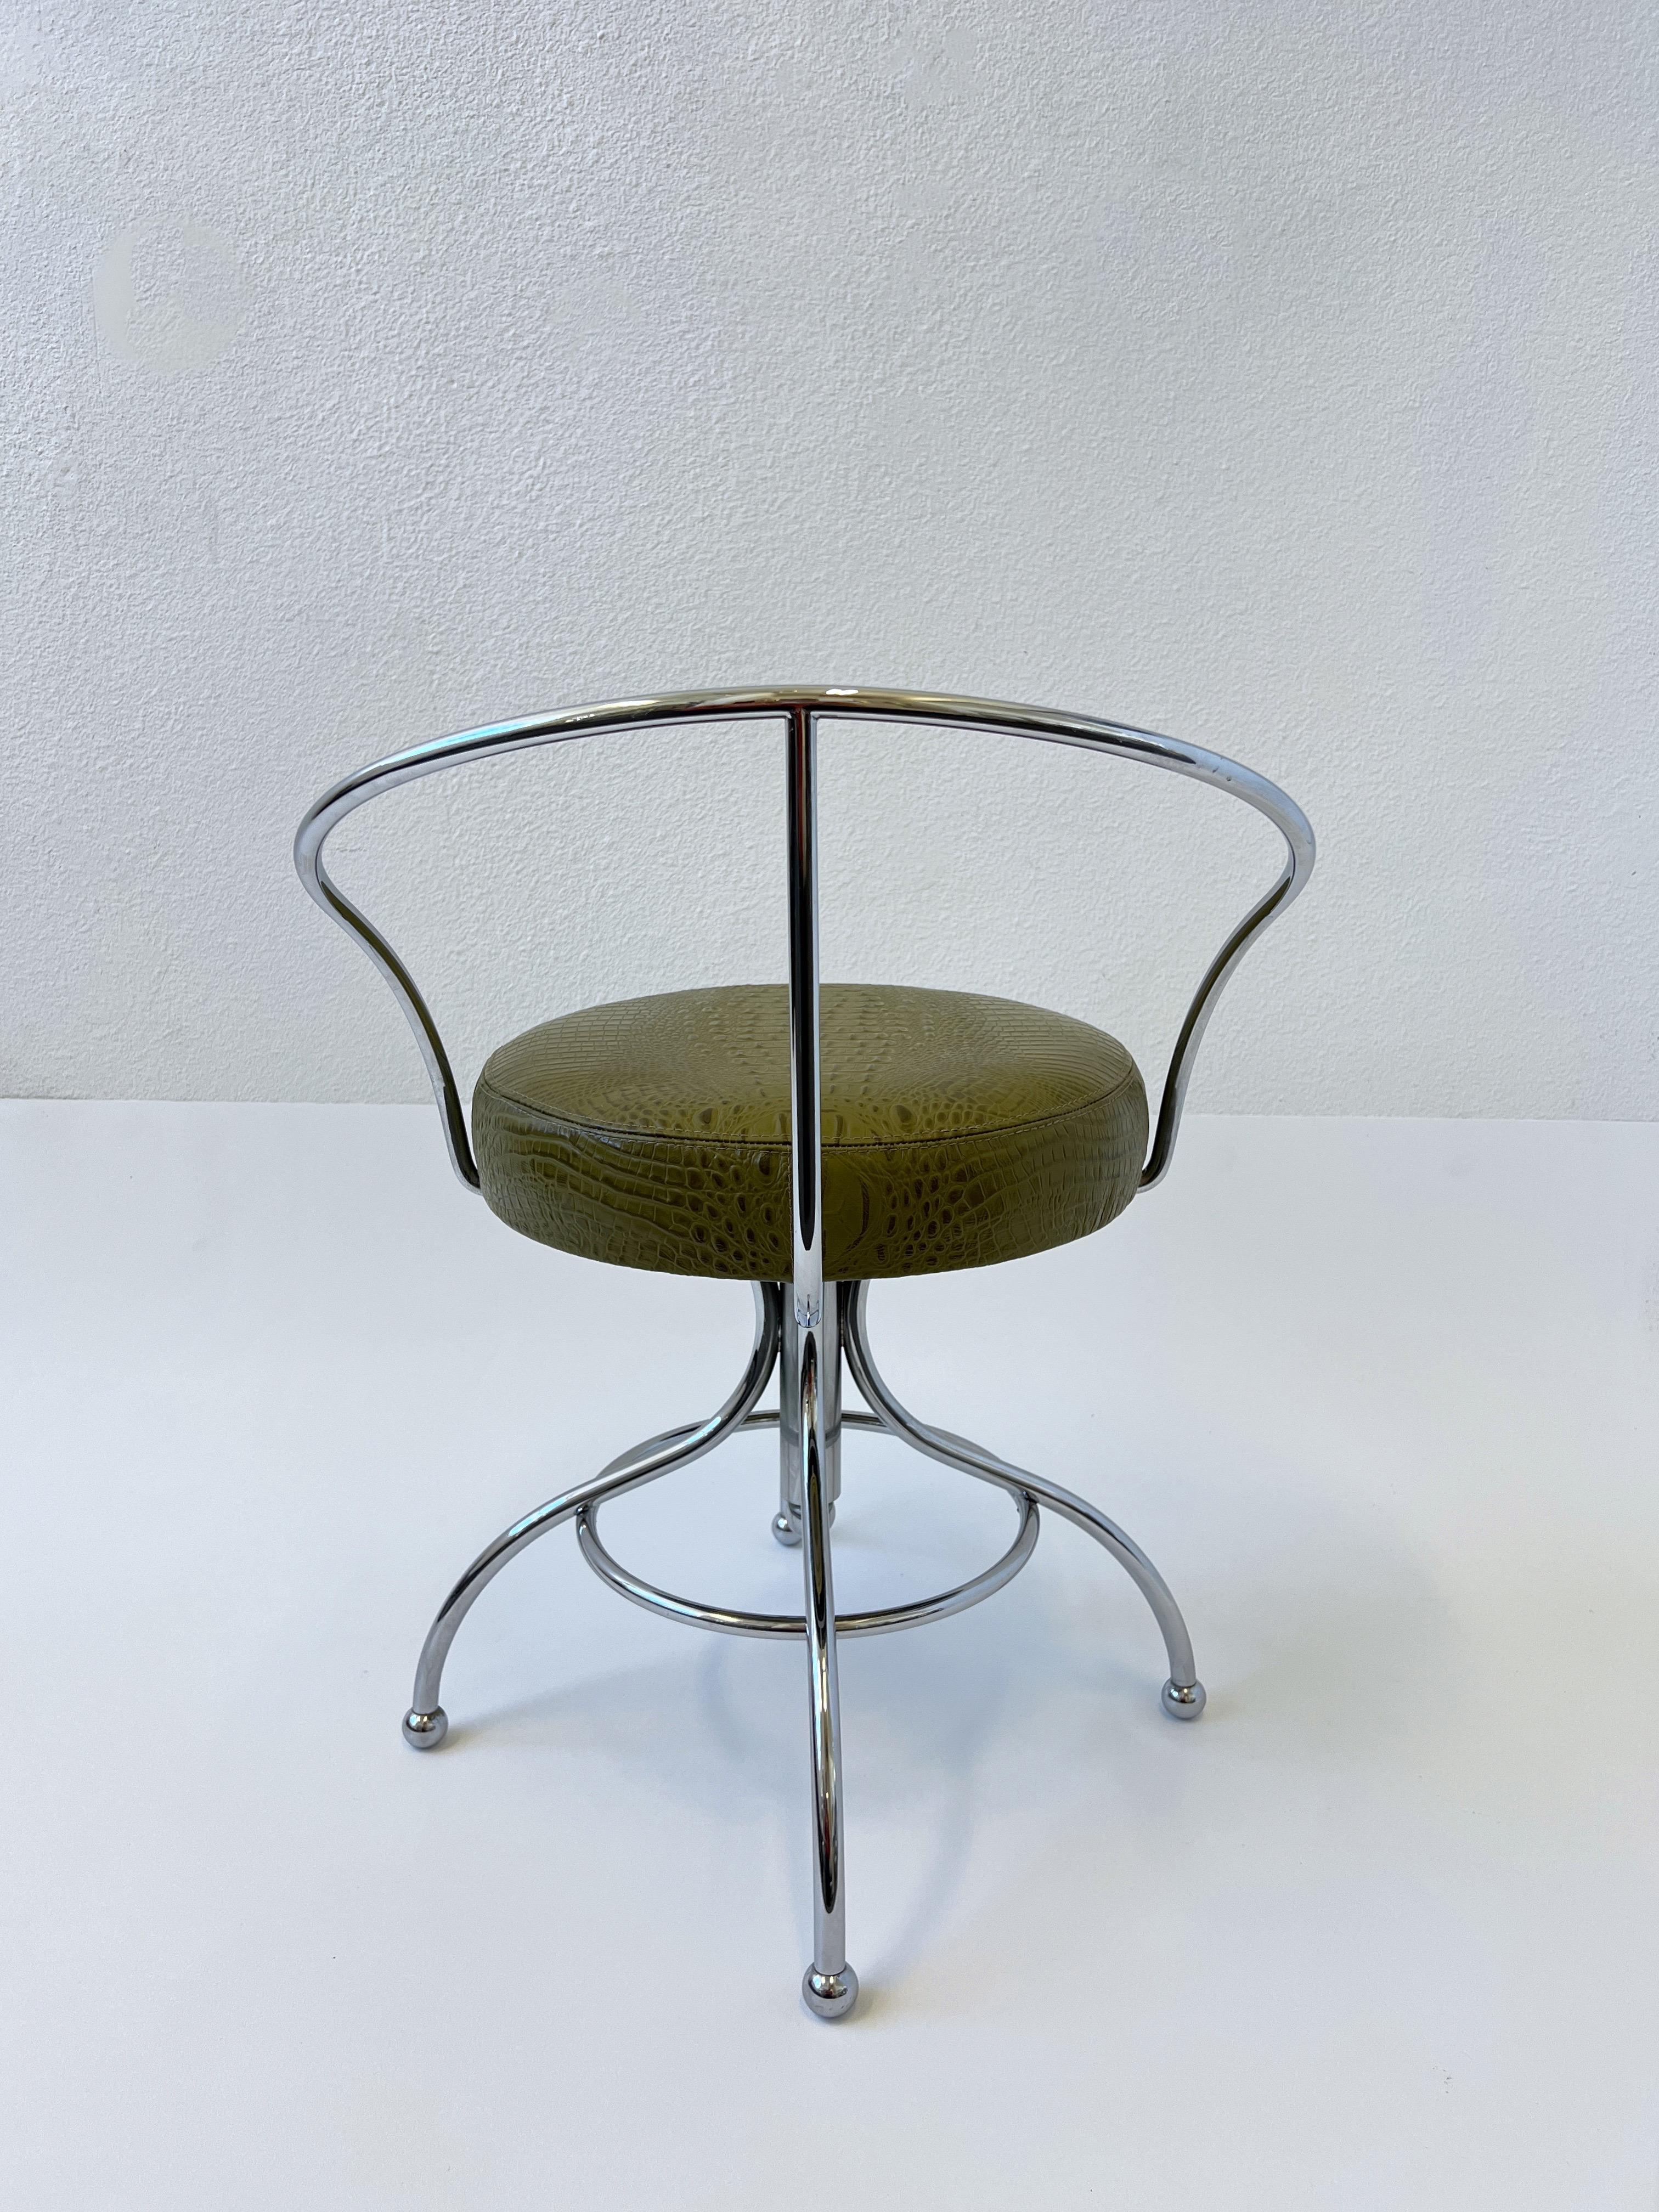 Glamorous 1970’s swivel polish chrome vanity stool, part of the “Ball Line” by American renowned designer Charles Hollis Jones. 
Out of an Arthur Elrod Design estate in Palm Springs. 
The frame is in beautiful original condition, the seat was